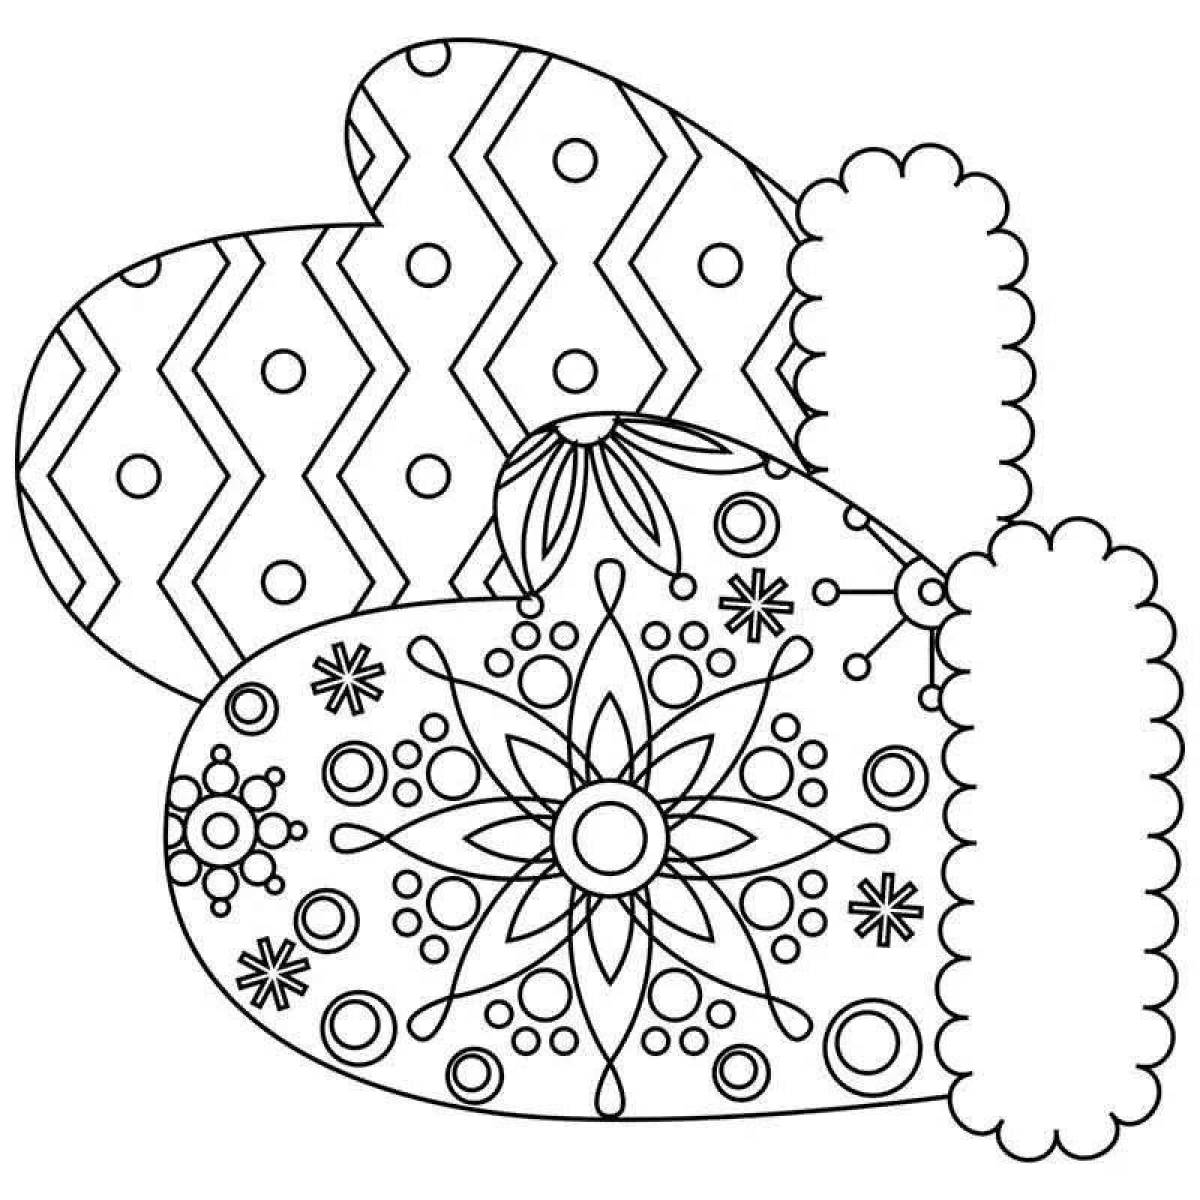 Ornate Christmas pattern coloring pages